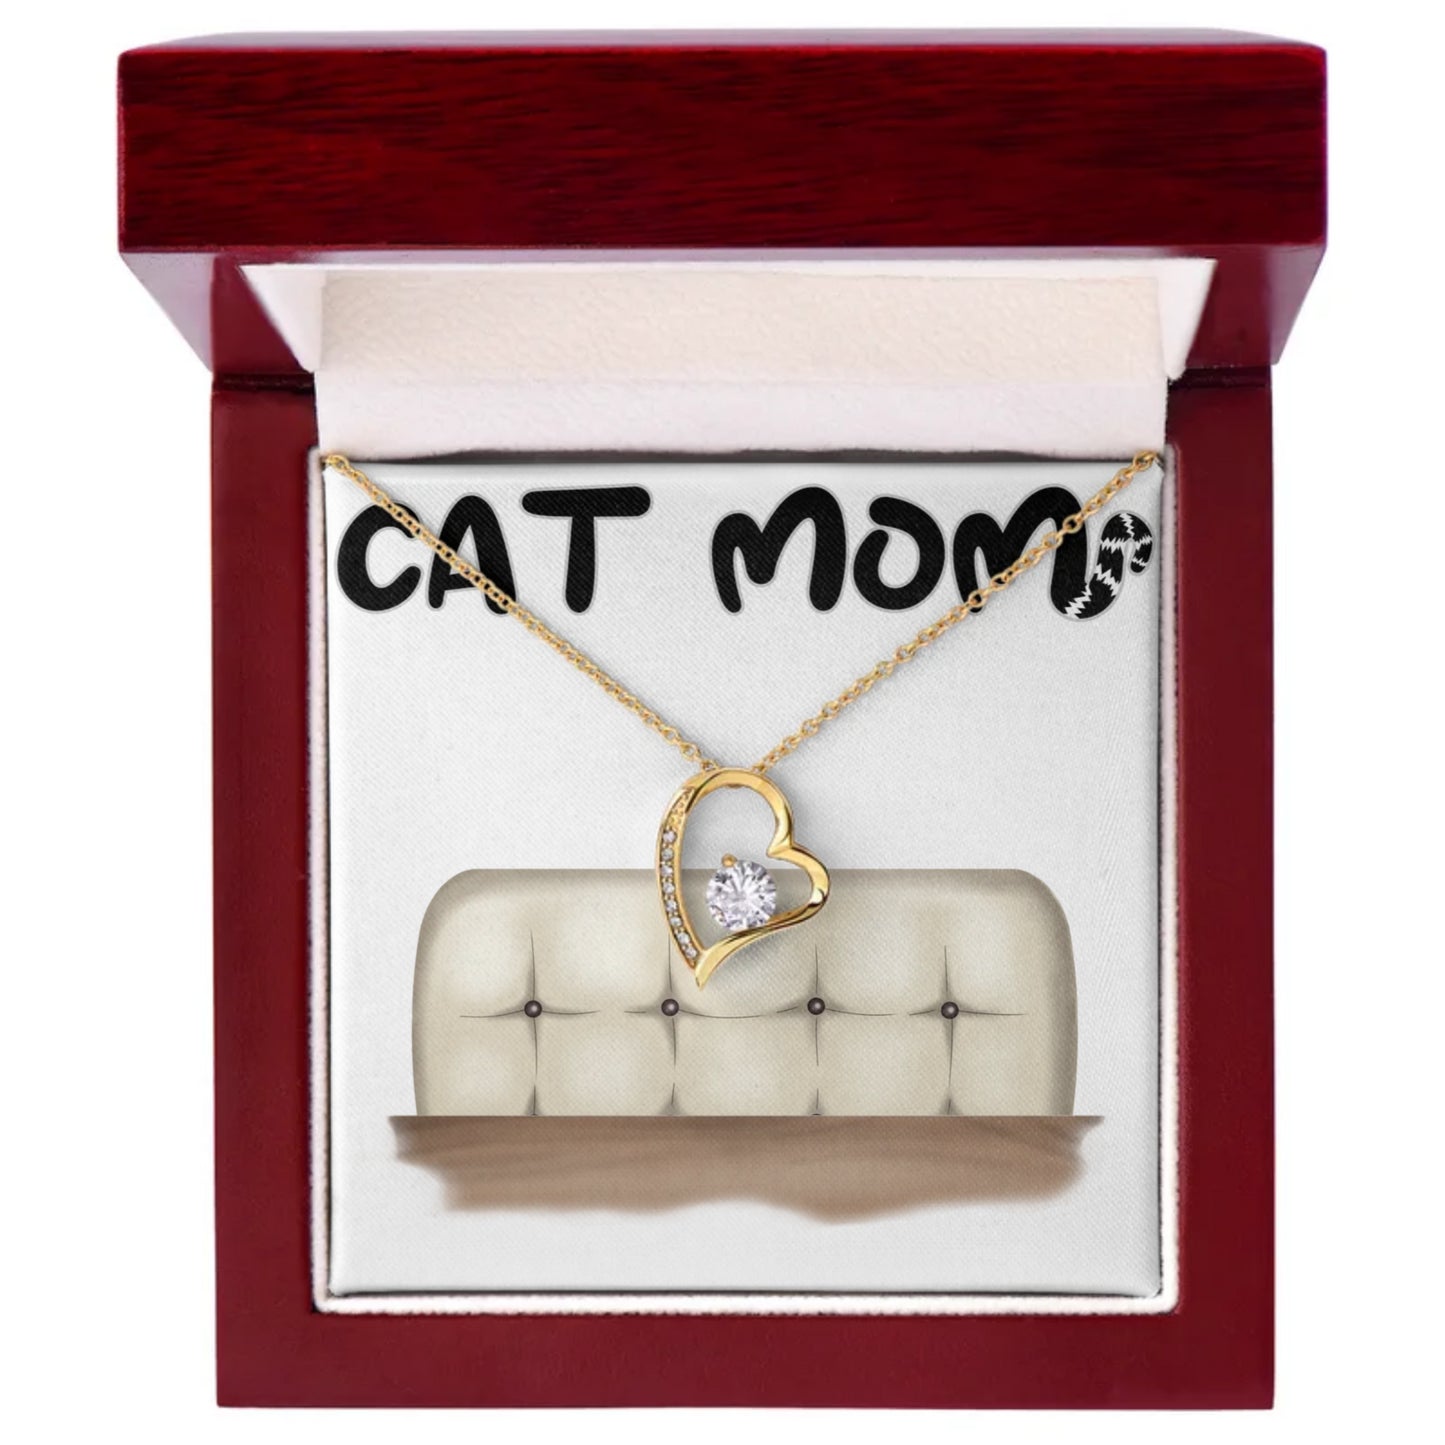 Cat Mom Forever Love Necklace - 18k yellow gold finish